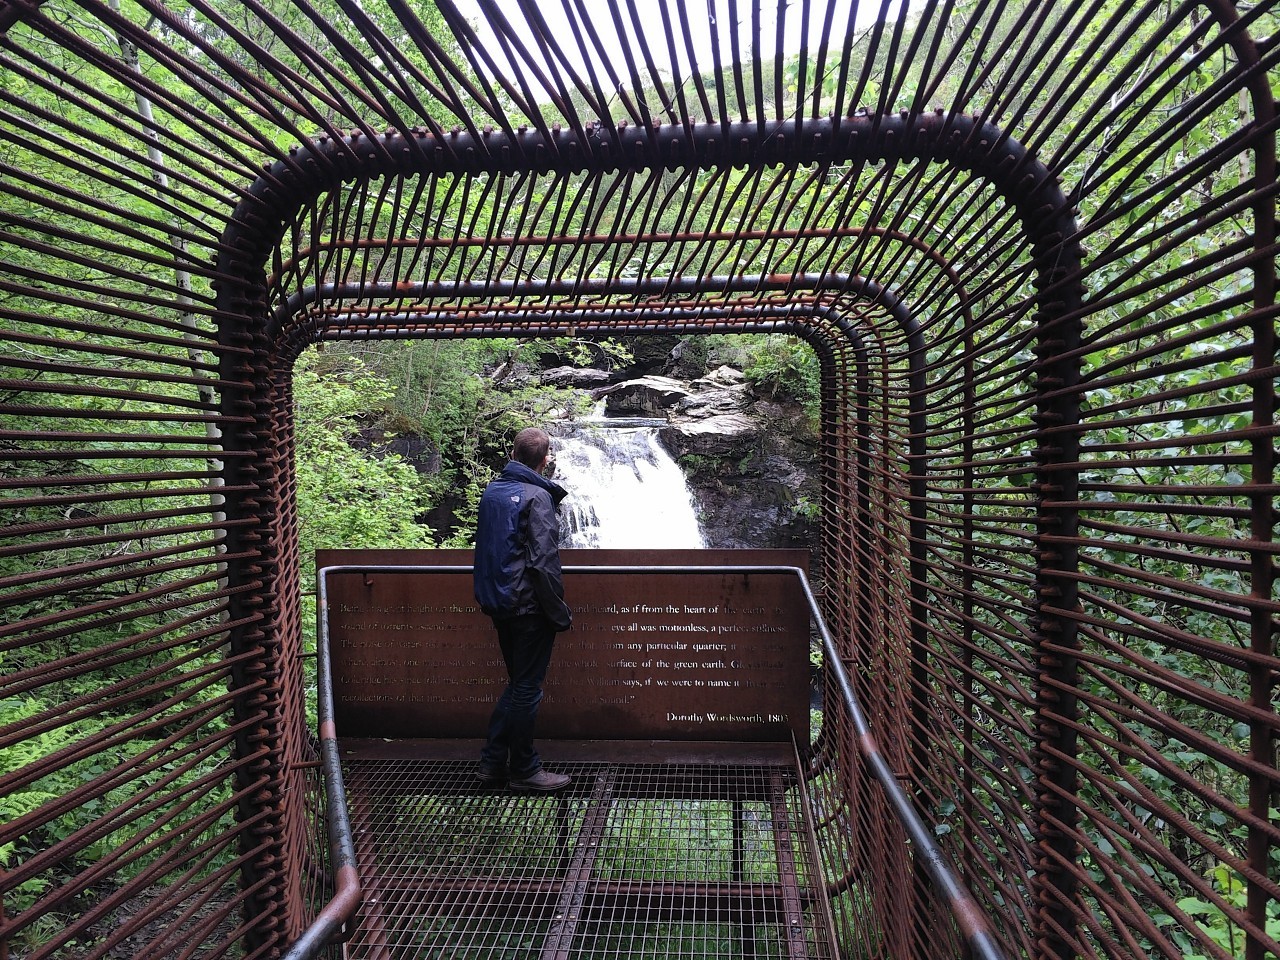 the new viewing installation called Woven Sound at the Falls of Falloch at Loch Lomond